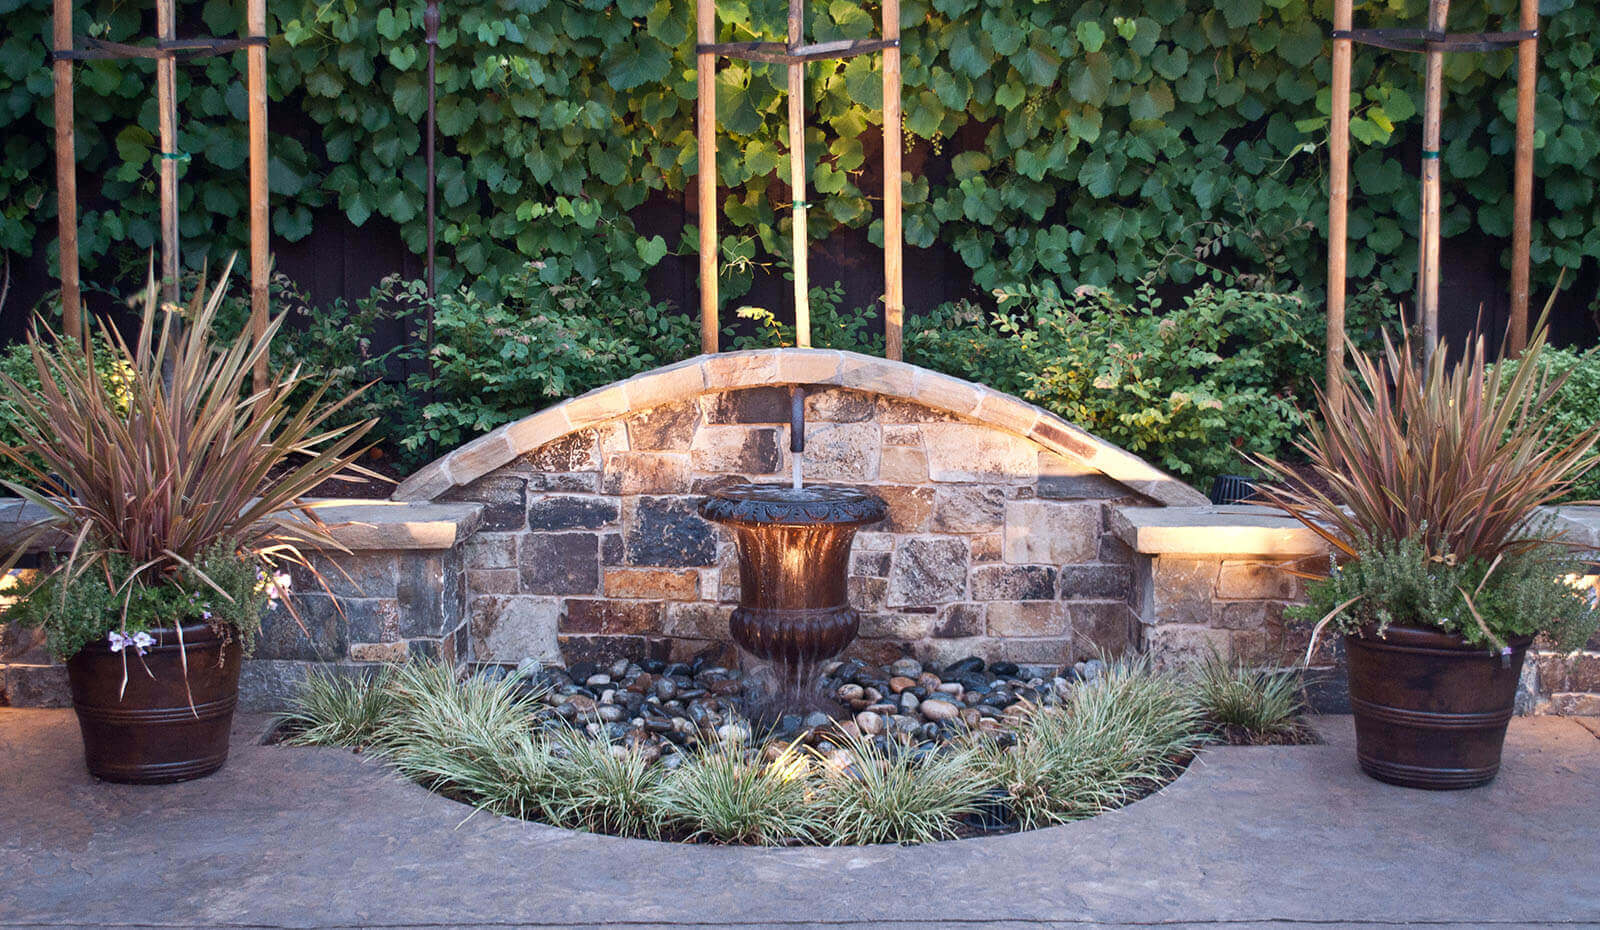 Small potted fountain with stone backdrop and accented pots with grass and plants inside